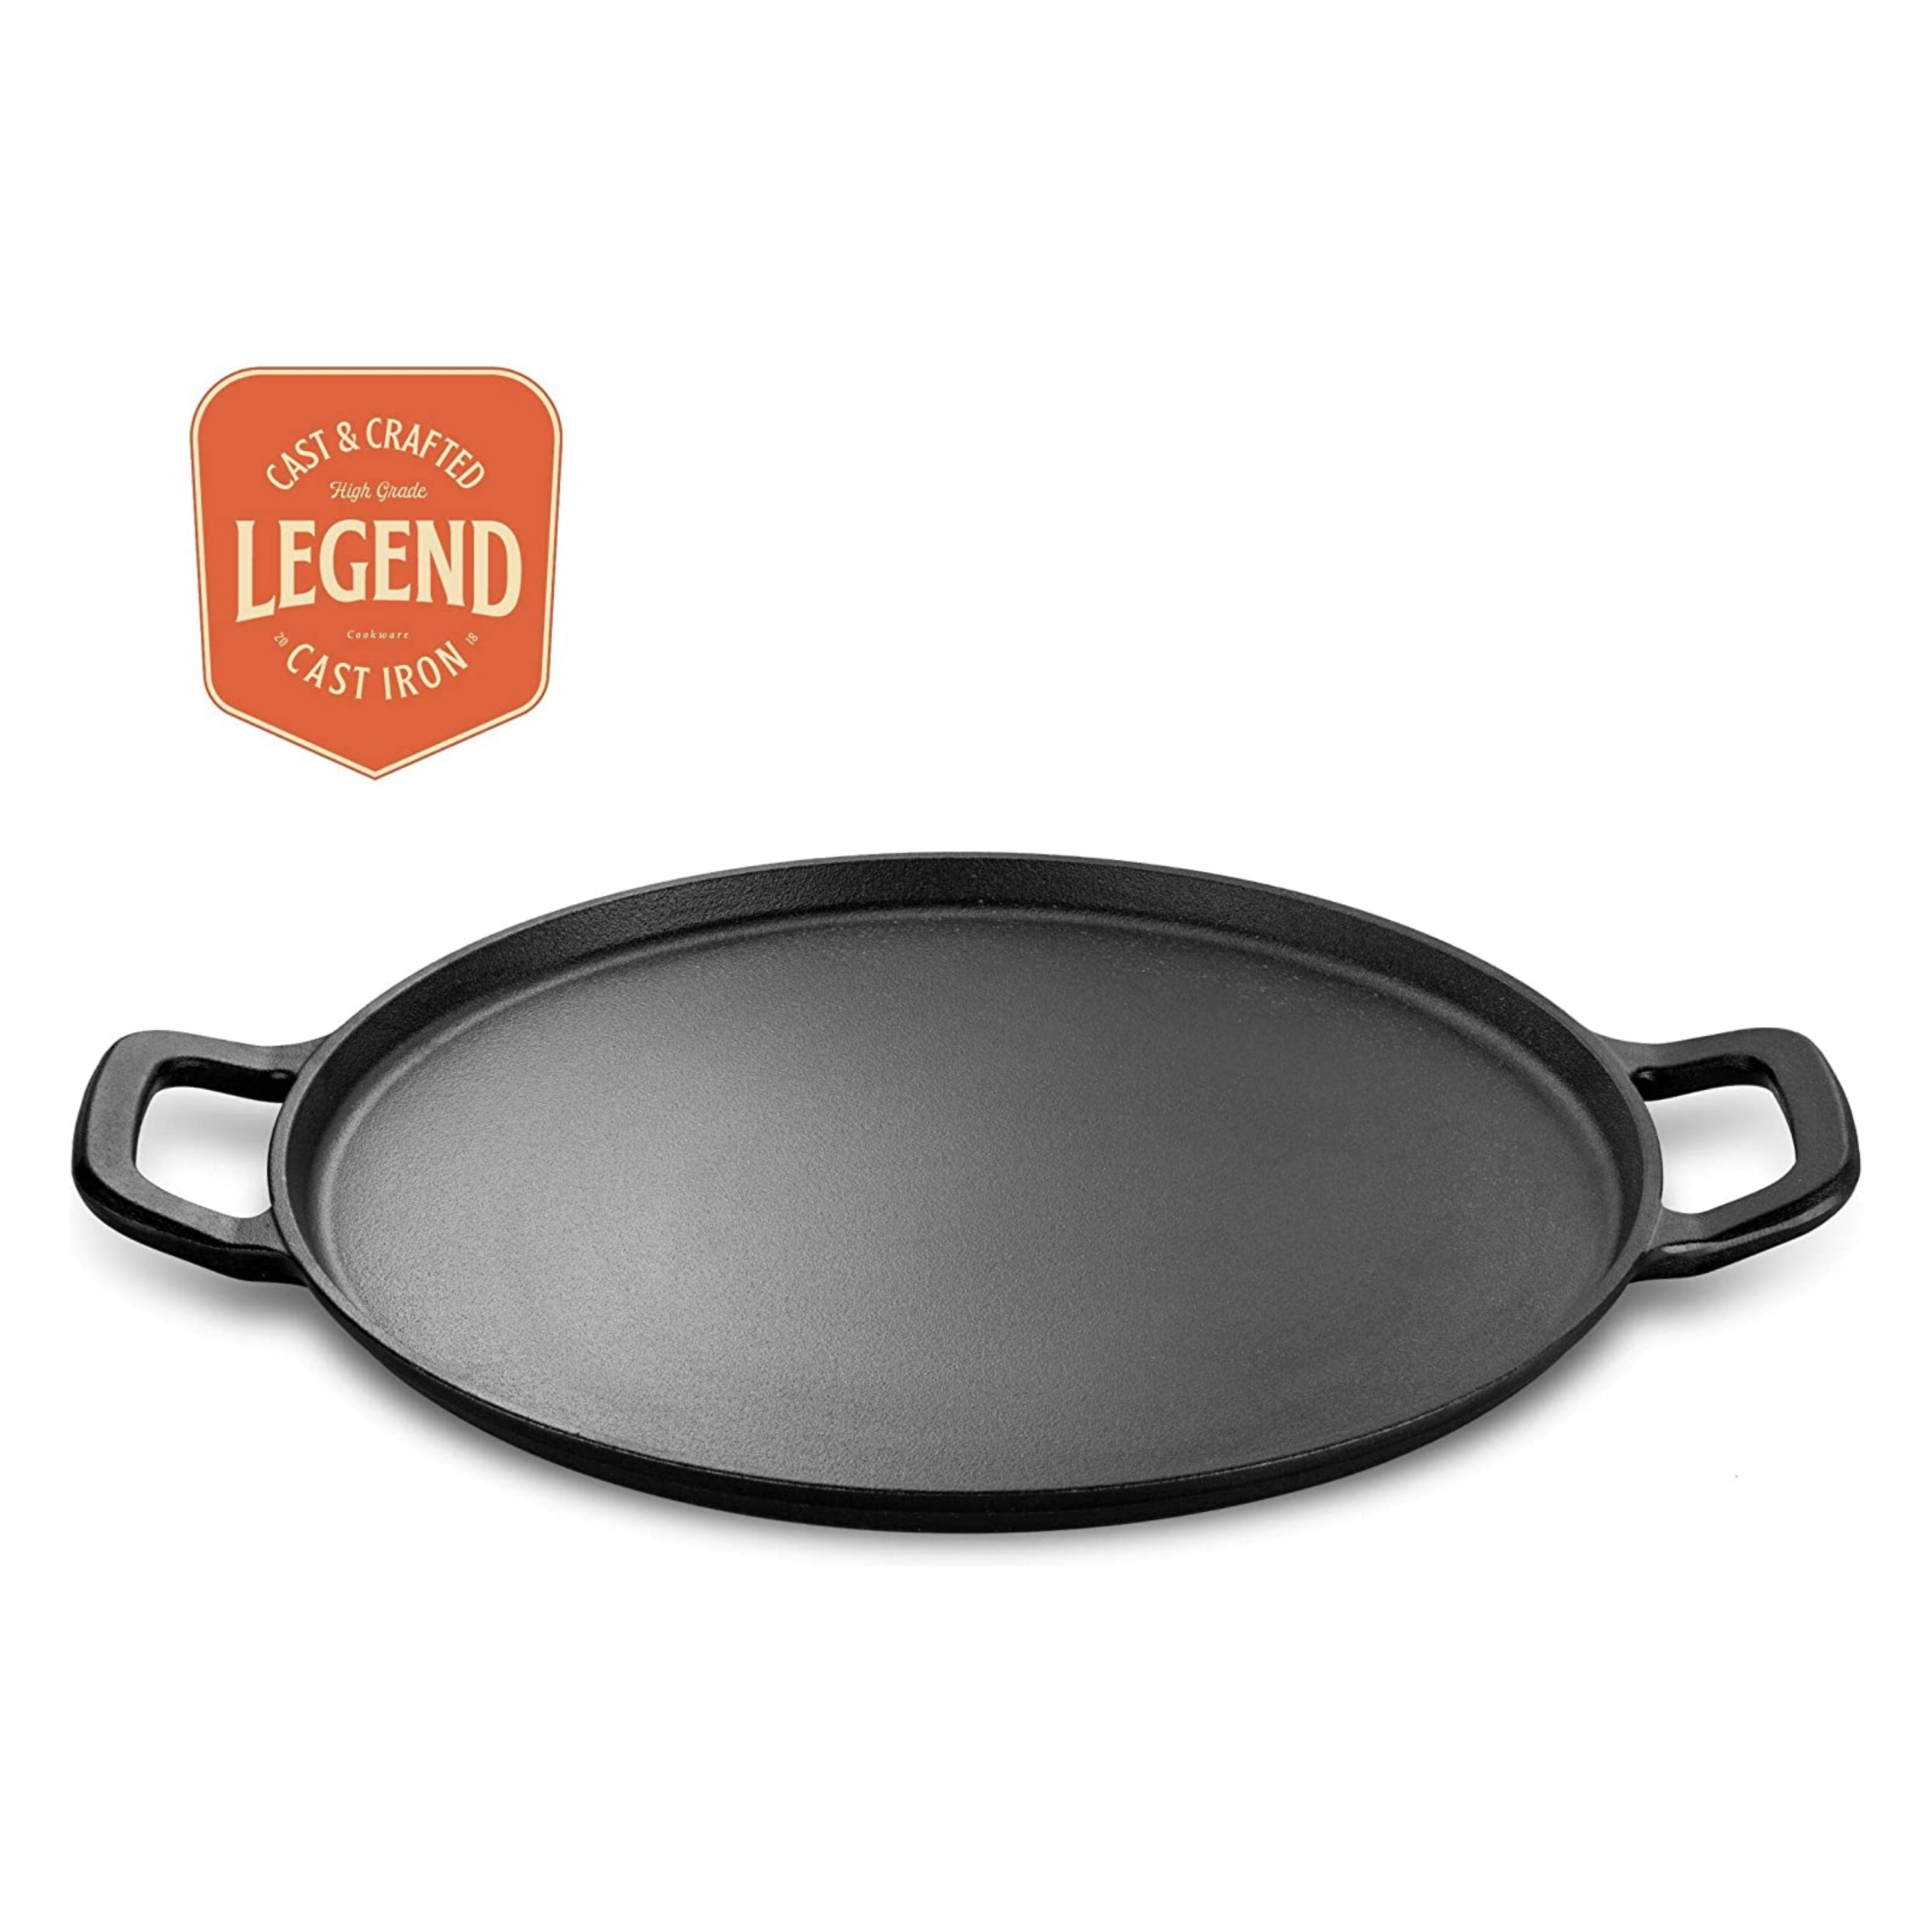 Making Pizza with the 14 inch Lodge Cast Iron Pizza Baking Pan